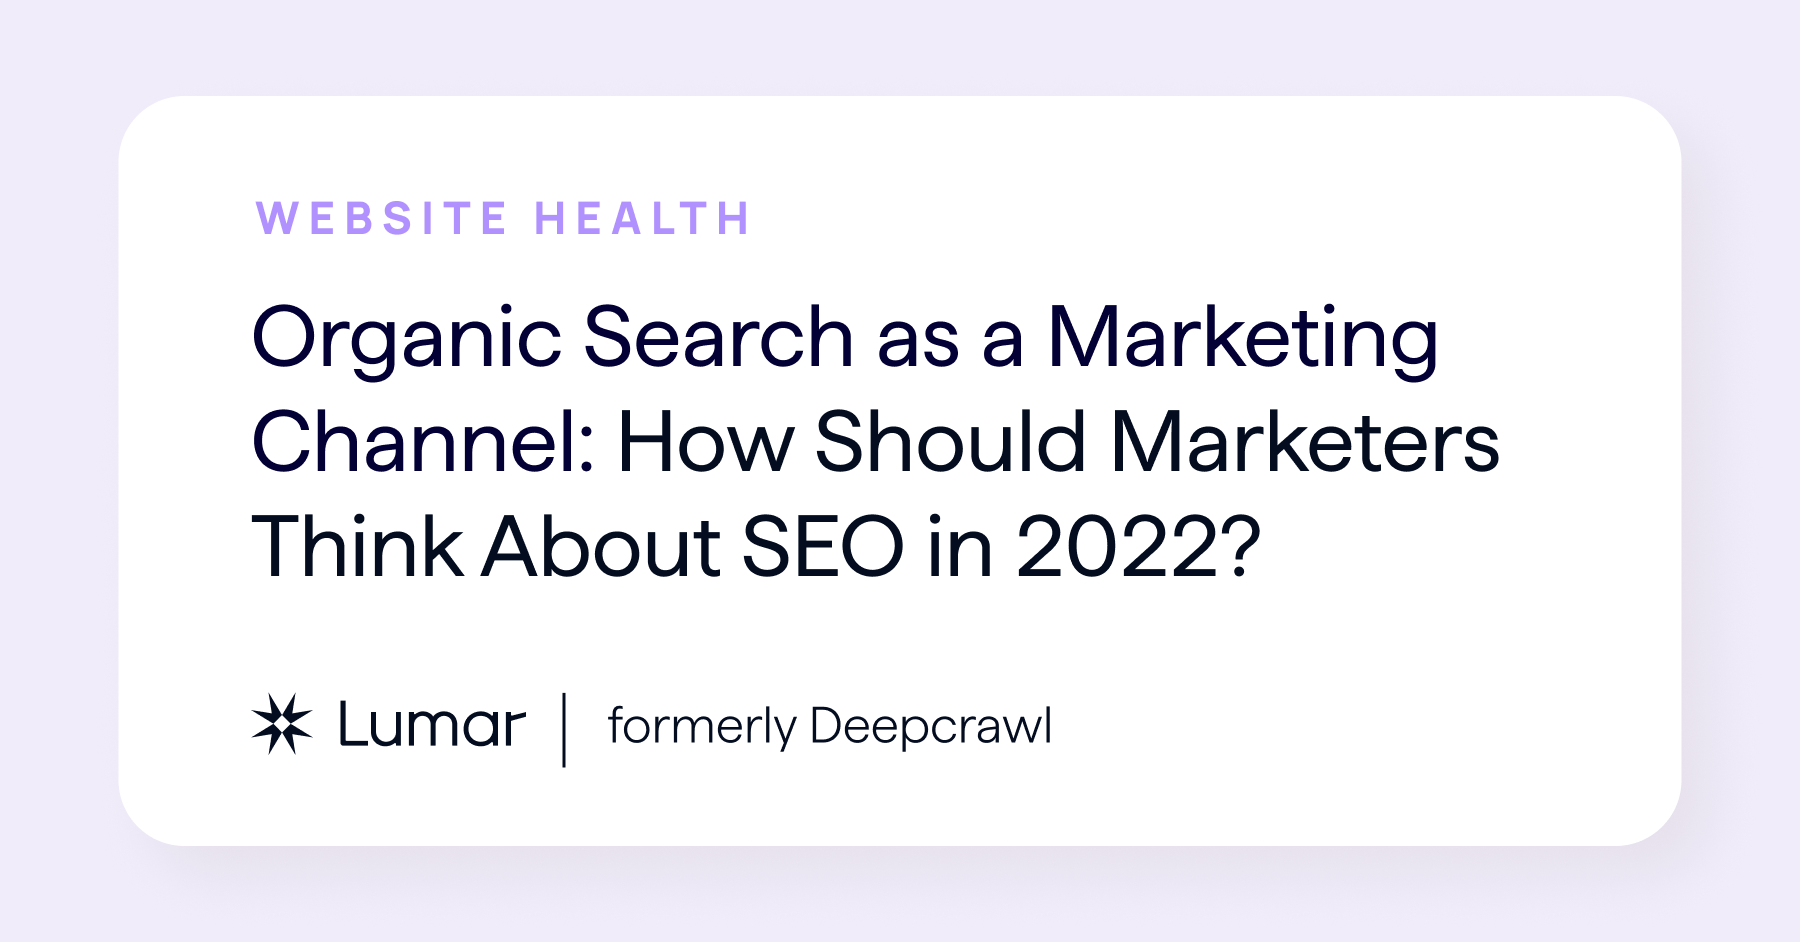 Organic Search and SEO as a Marketing Channel